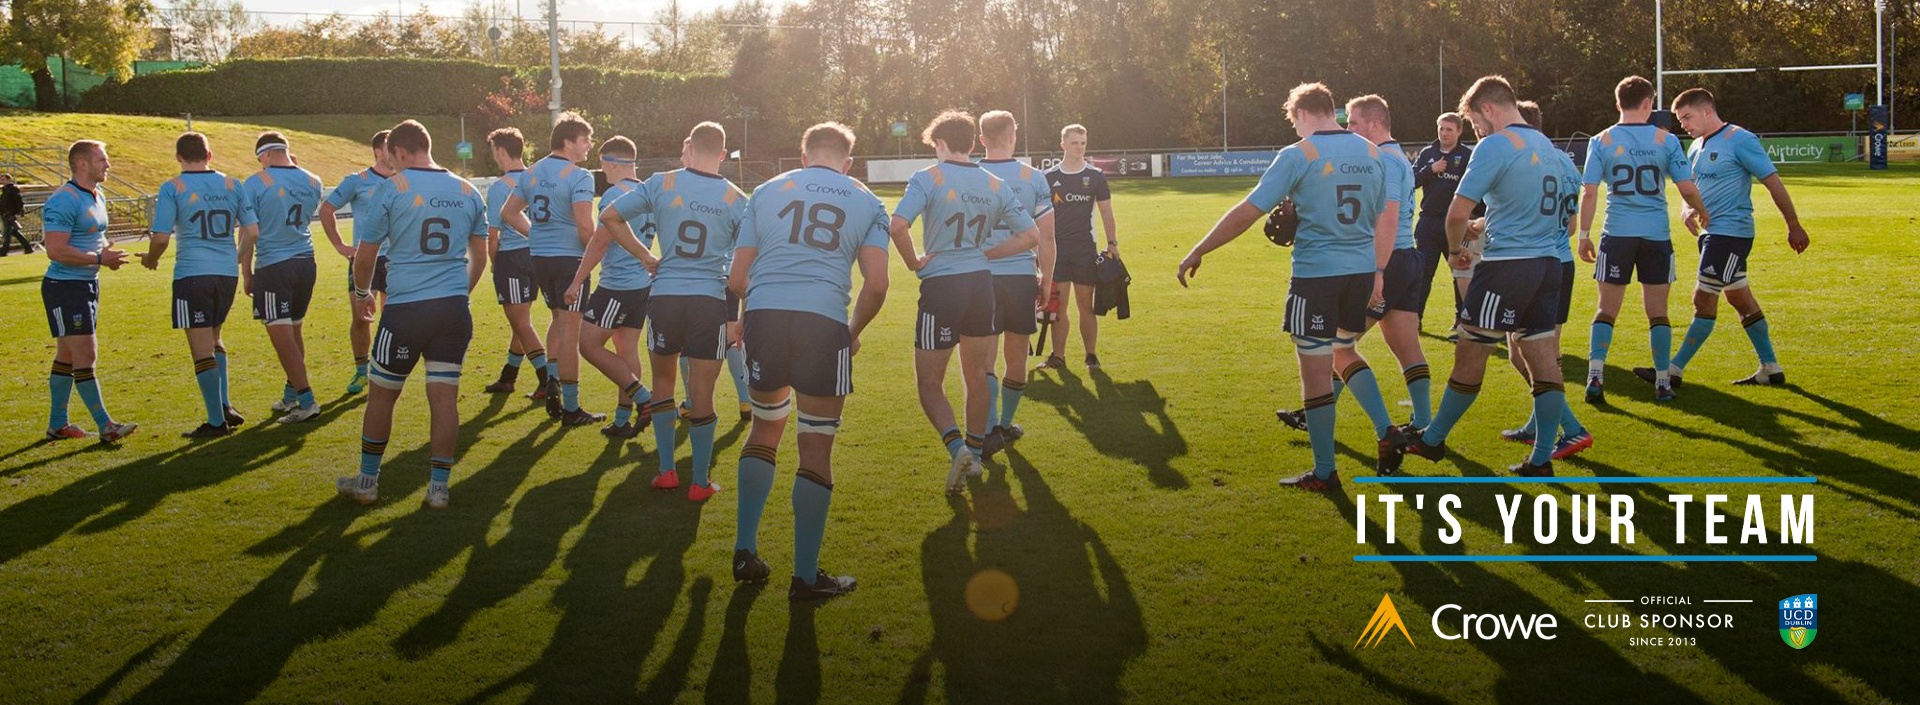 UCD RFC Crowe developing extraordinary talent together